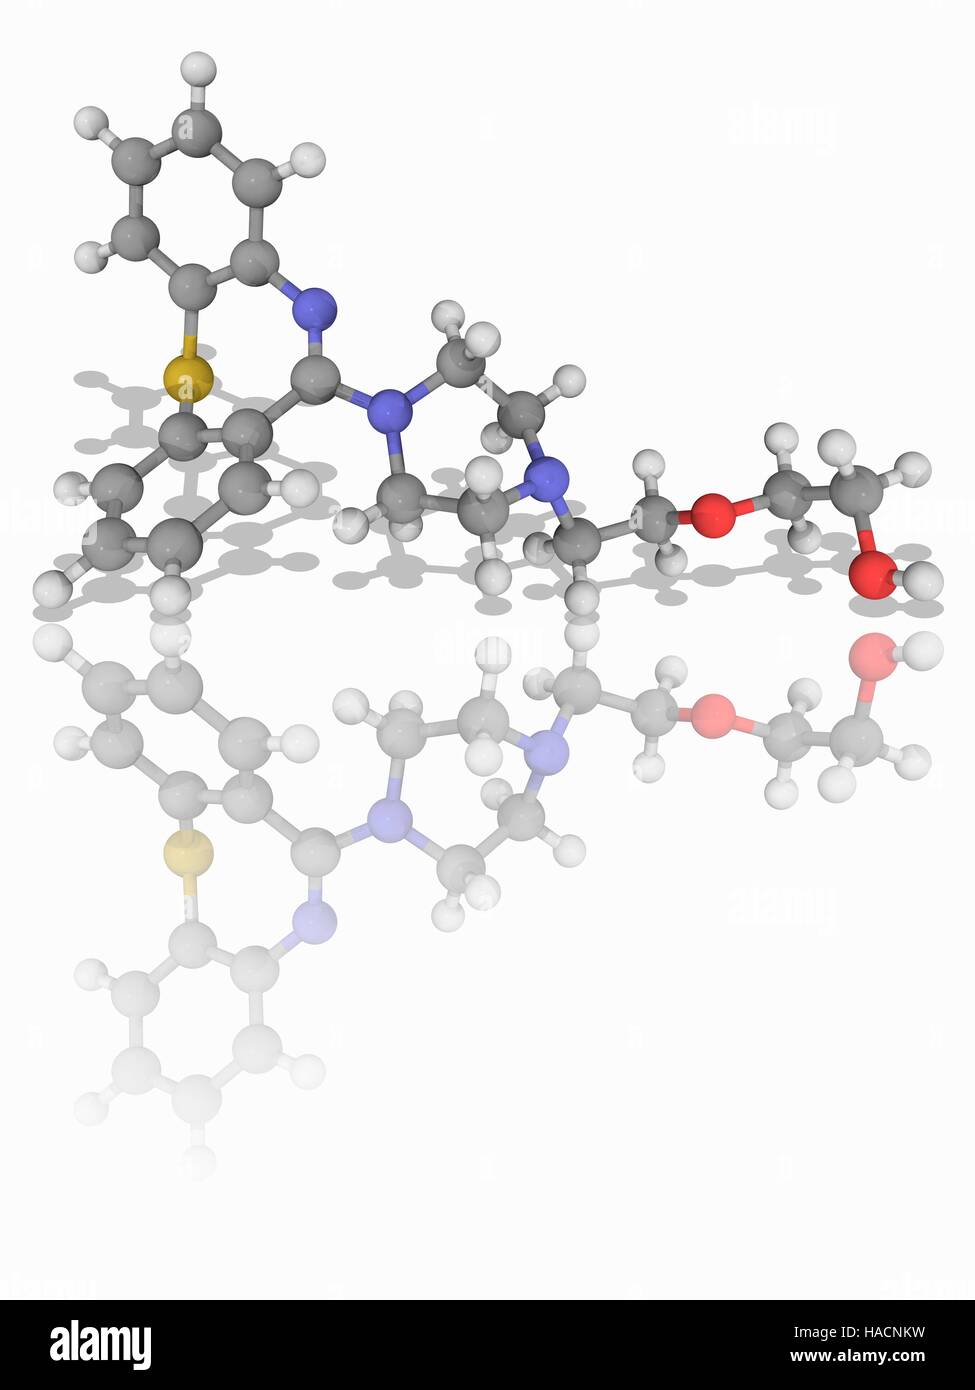 Quetiapine. Molecular model of the antipsychotic drug quetiapine (C21.H25.N3.O2.S), used to treat schizophrenia and bipolar disorder. It is also marketed as Seroquel. Atoms are represented as spheres and are colour-coded: carbon (grey), hydrogen (white), nitrogen (blue), oxygen (red) and sulphur (yellow). Illustration. Stock Photo